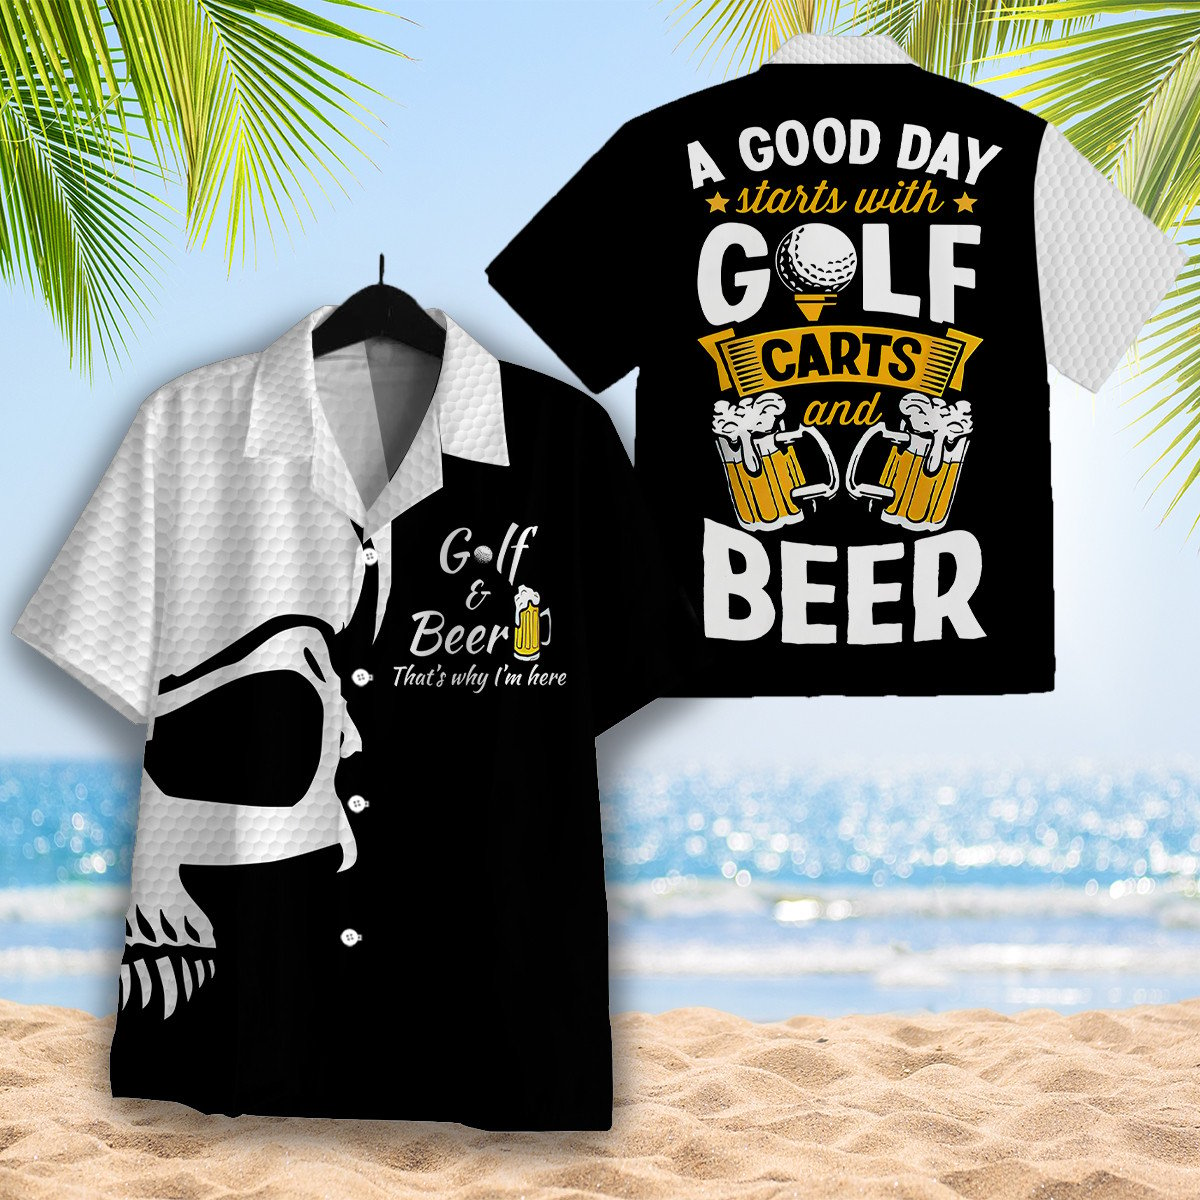 Golf And Beer That''s Why I''m Here Hawaiian Shirt For Men & Women